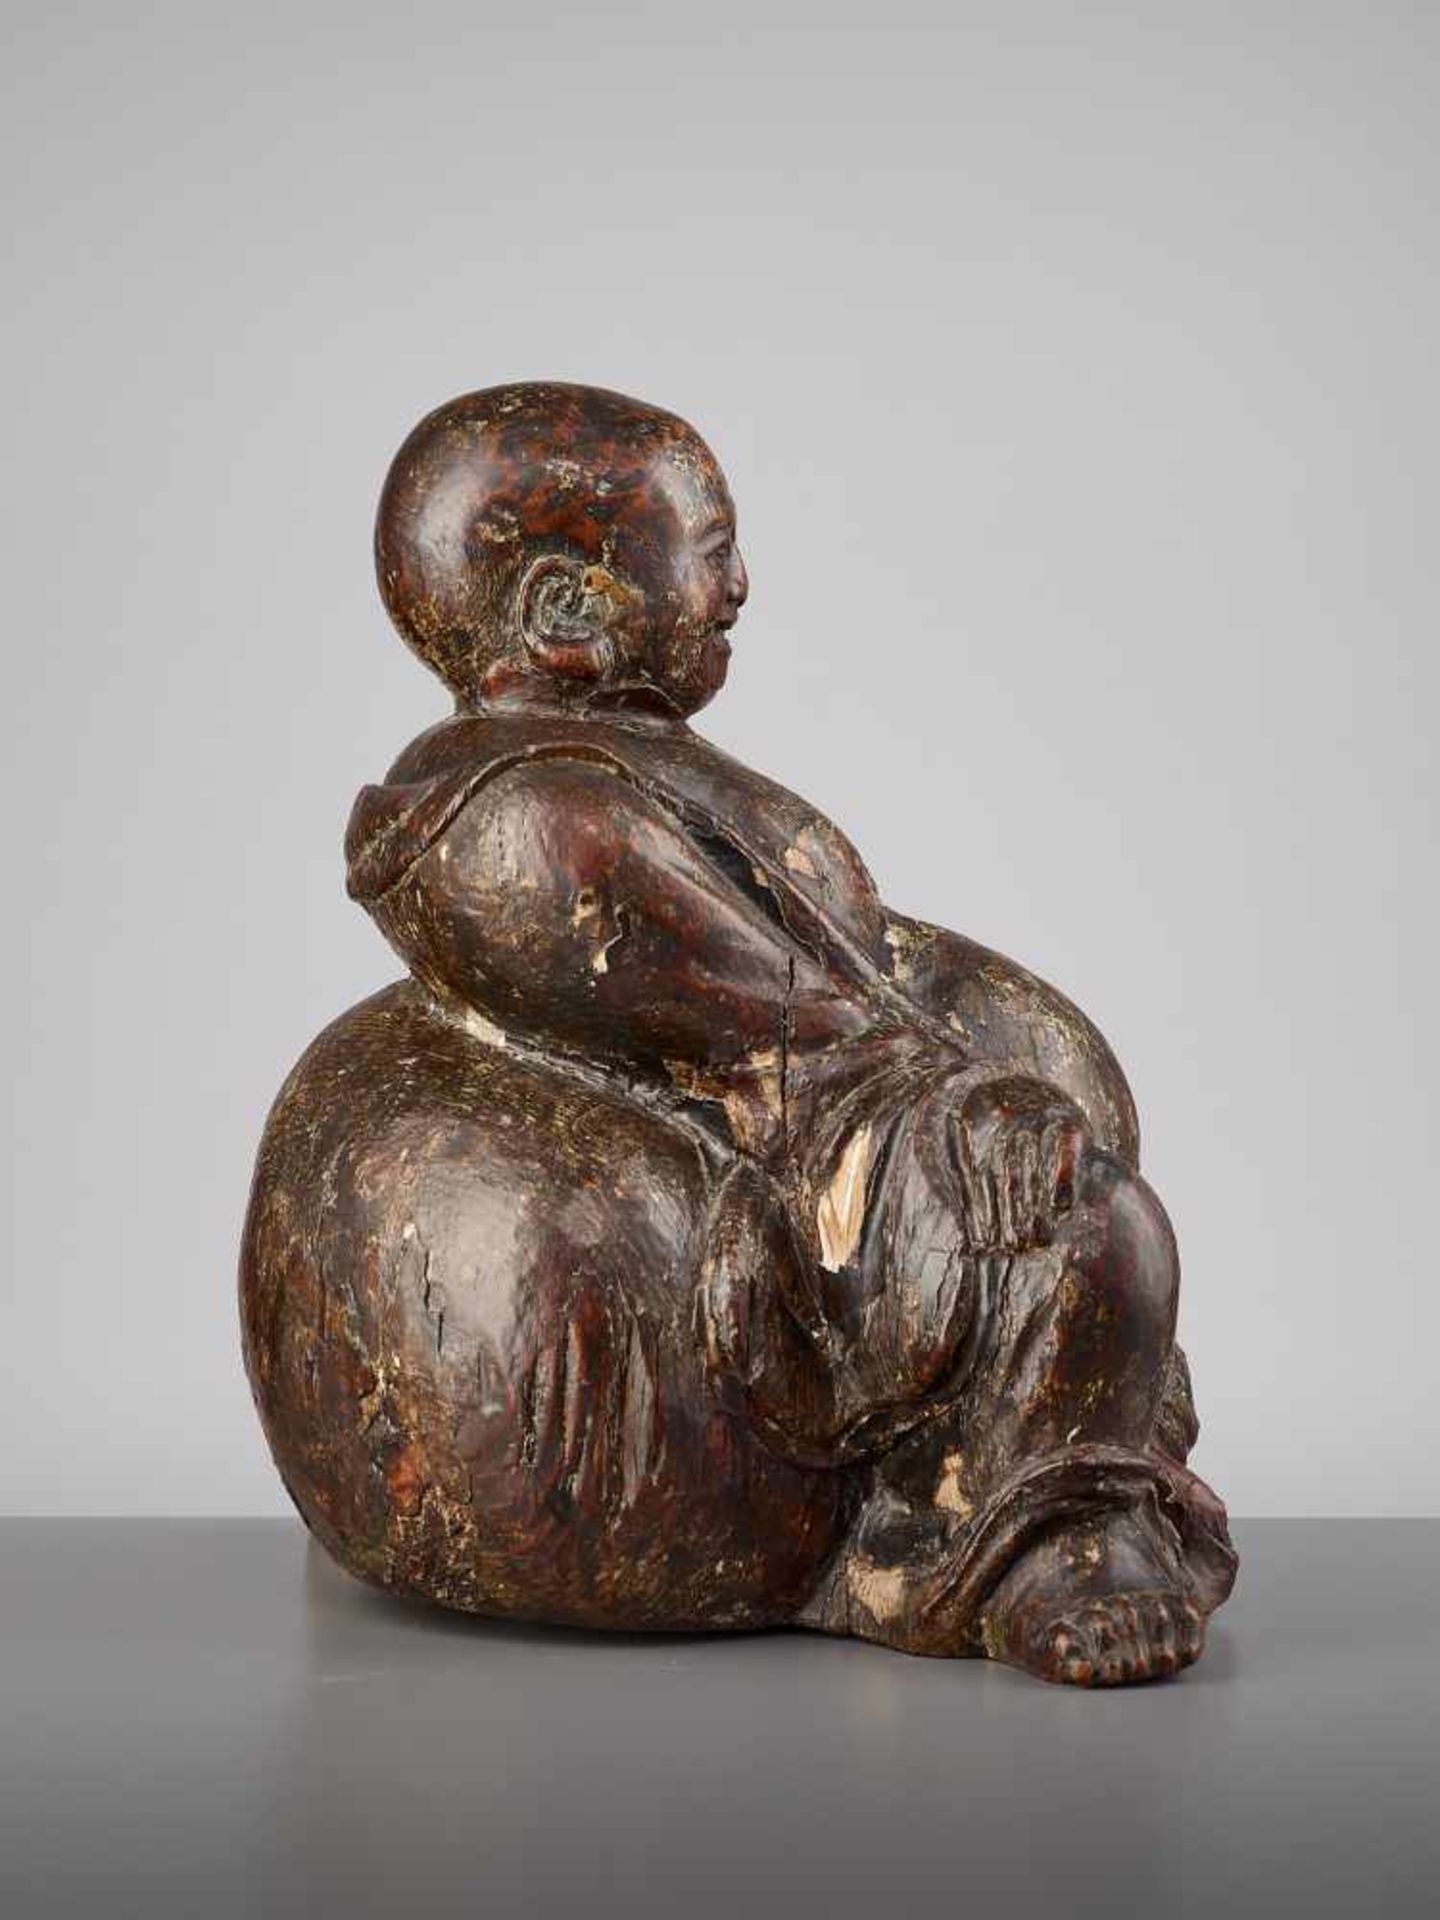 AN EXPRESSIVE WOOD BUDAI, MINGChina, 15th - 16th century. This earthy yet radiant sculpture of Budai - Image 7 of 9